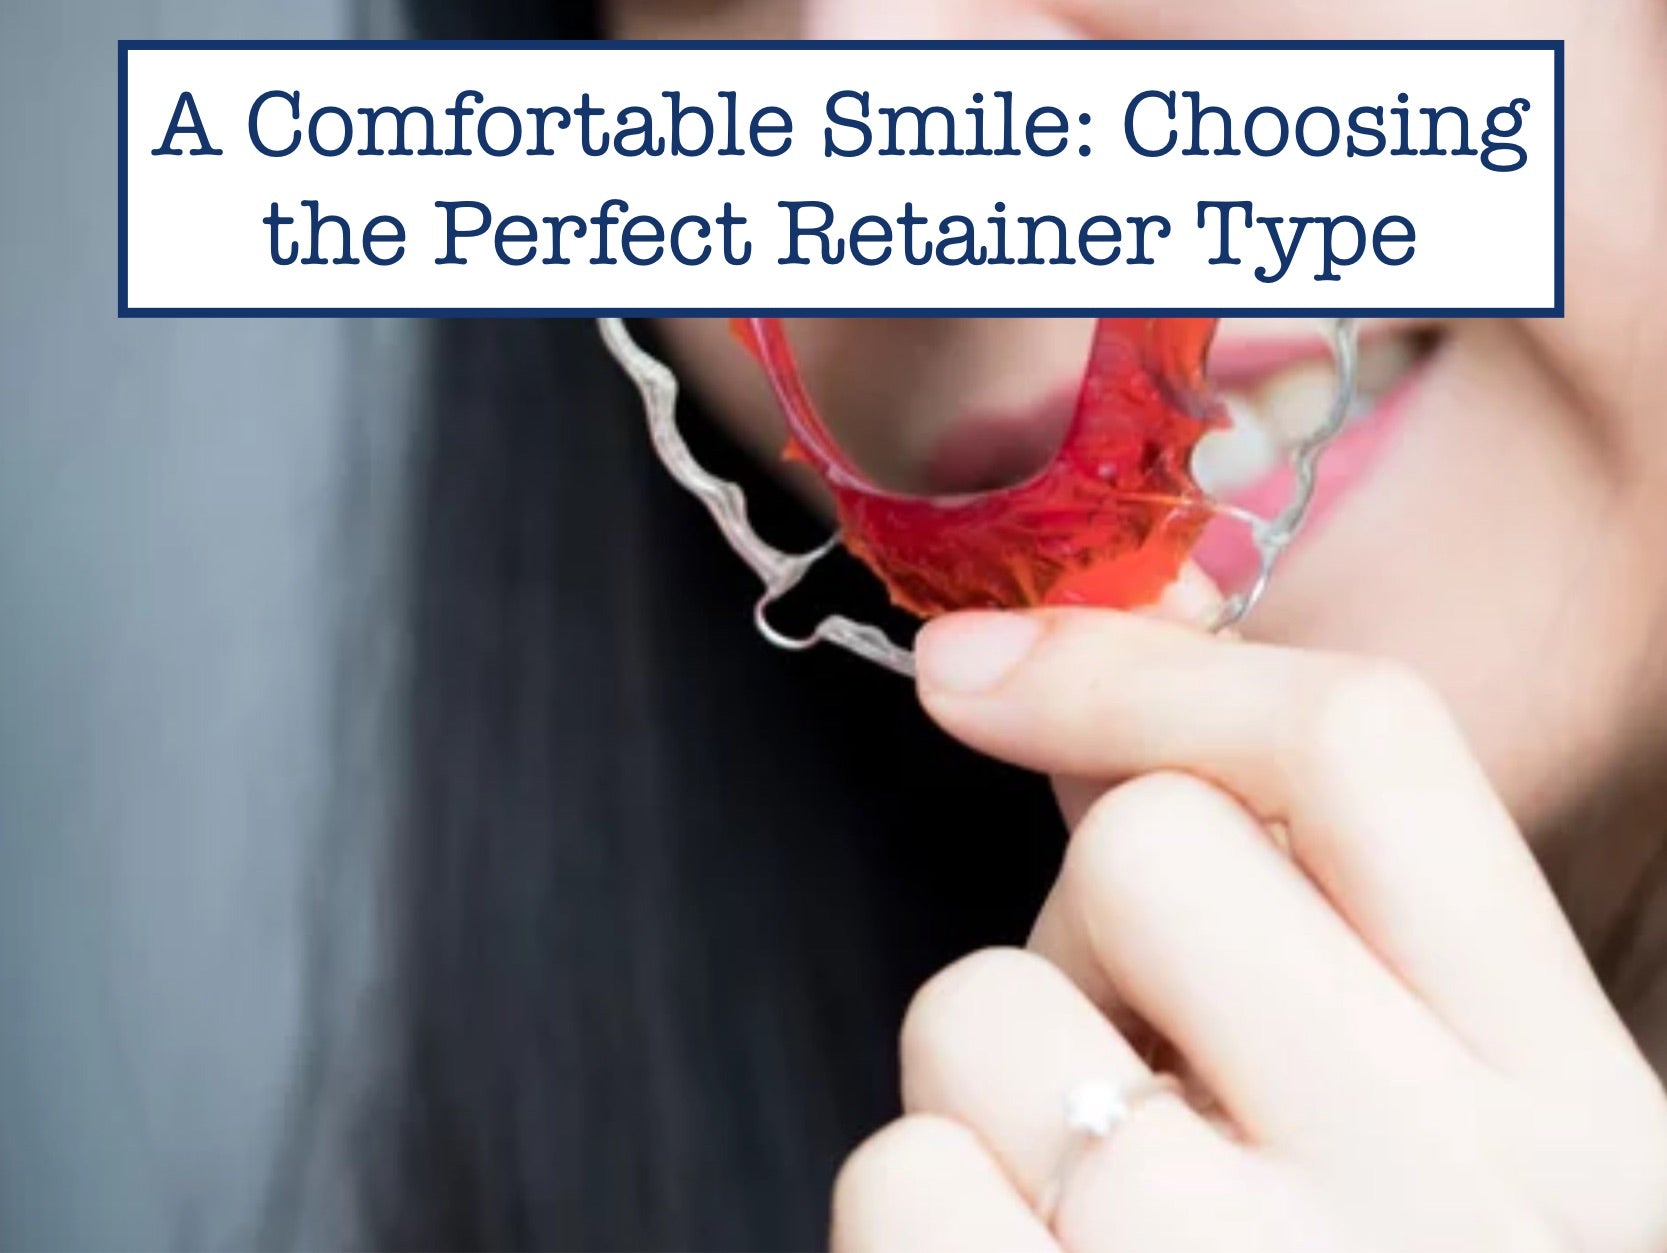 A Comfortable Smile: Choosing the Perfect Retainer Type